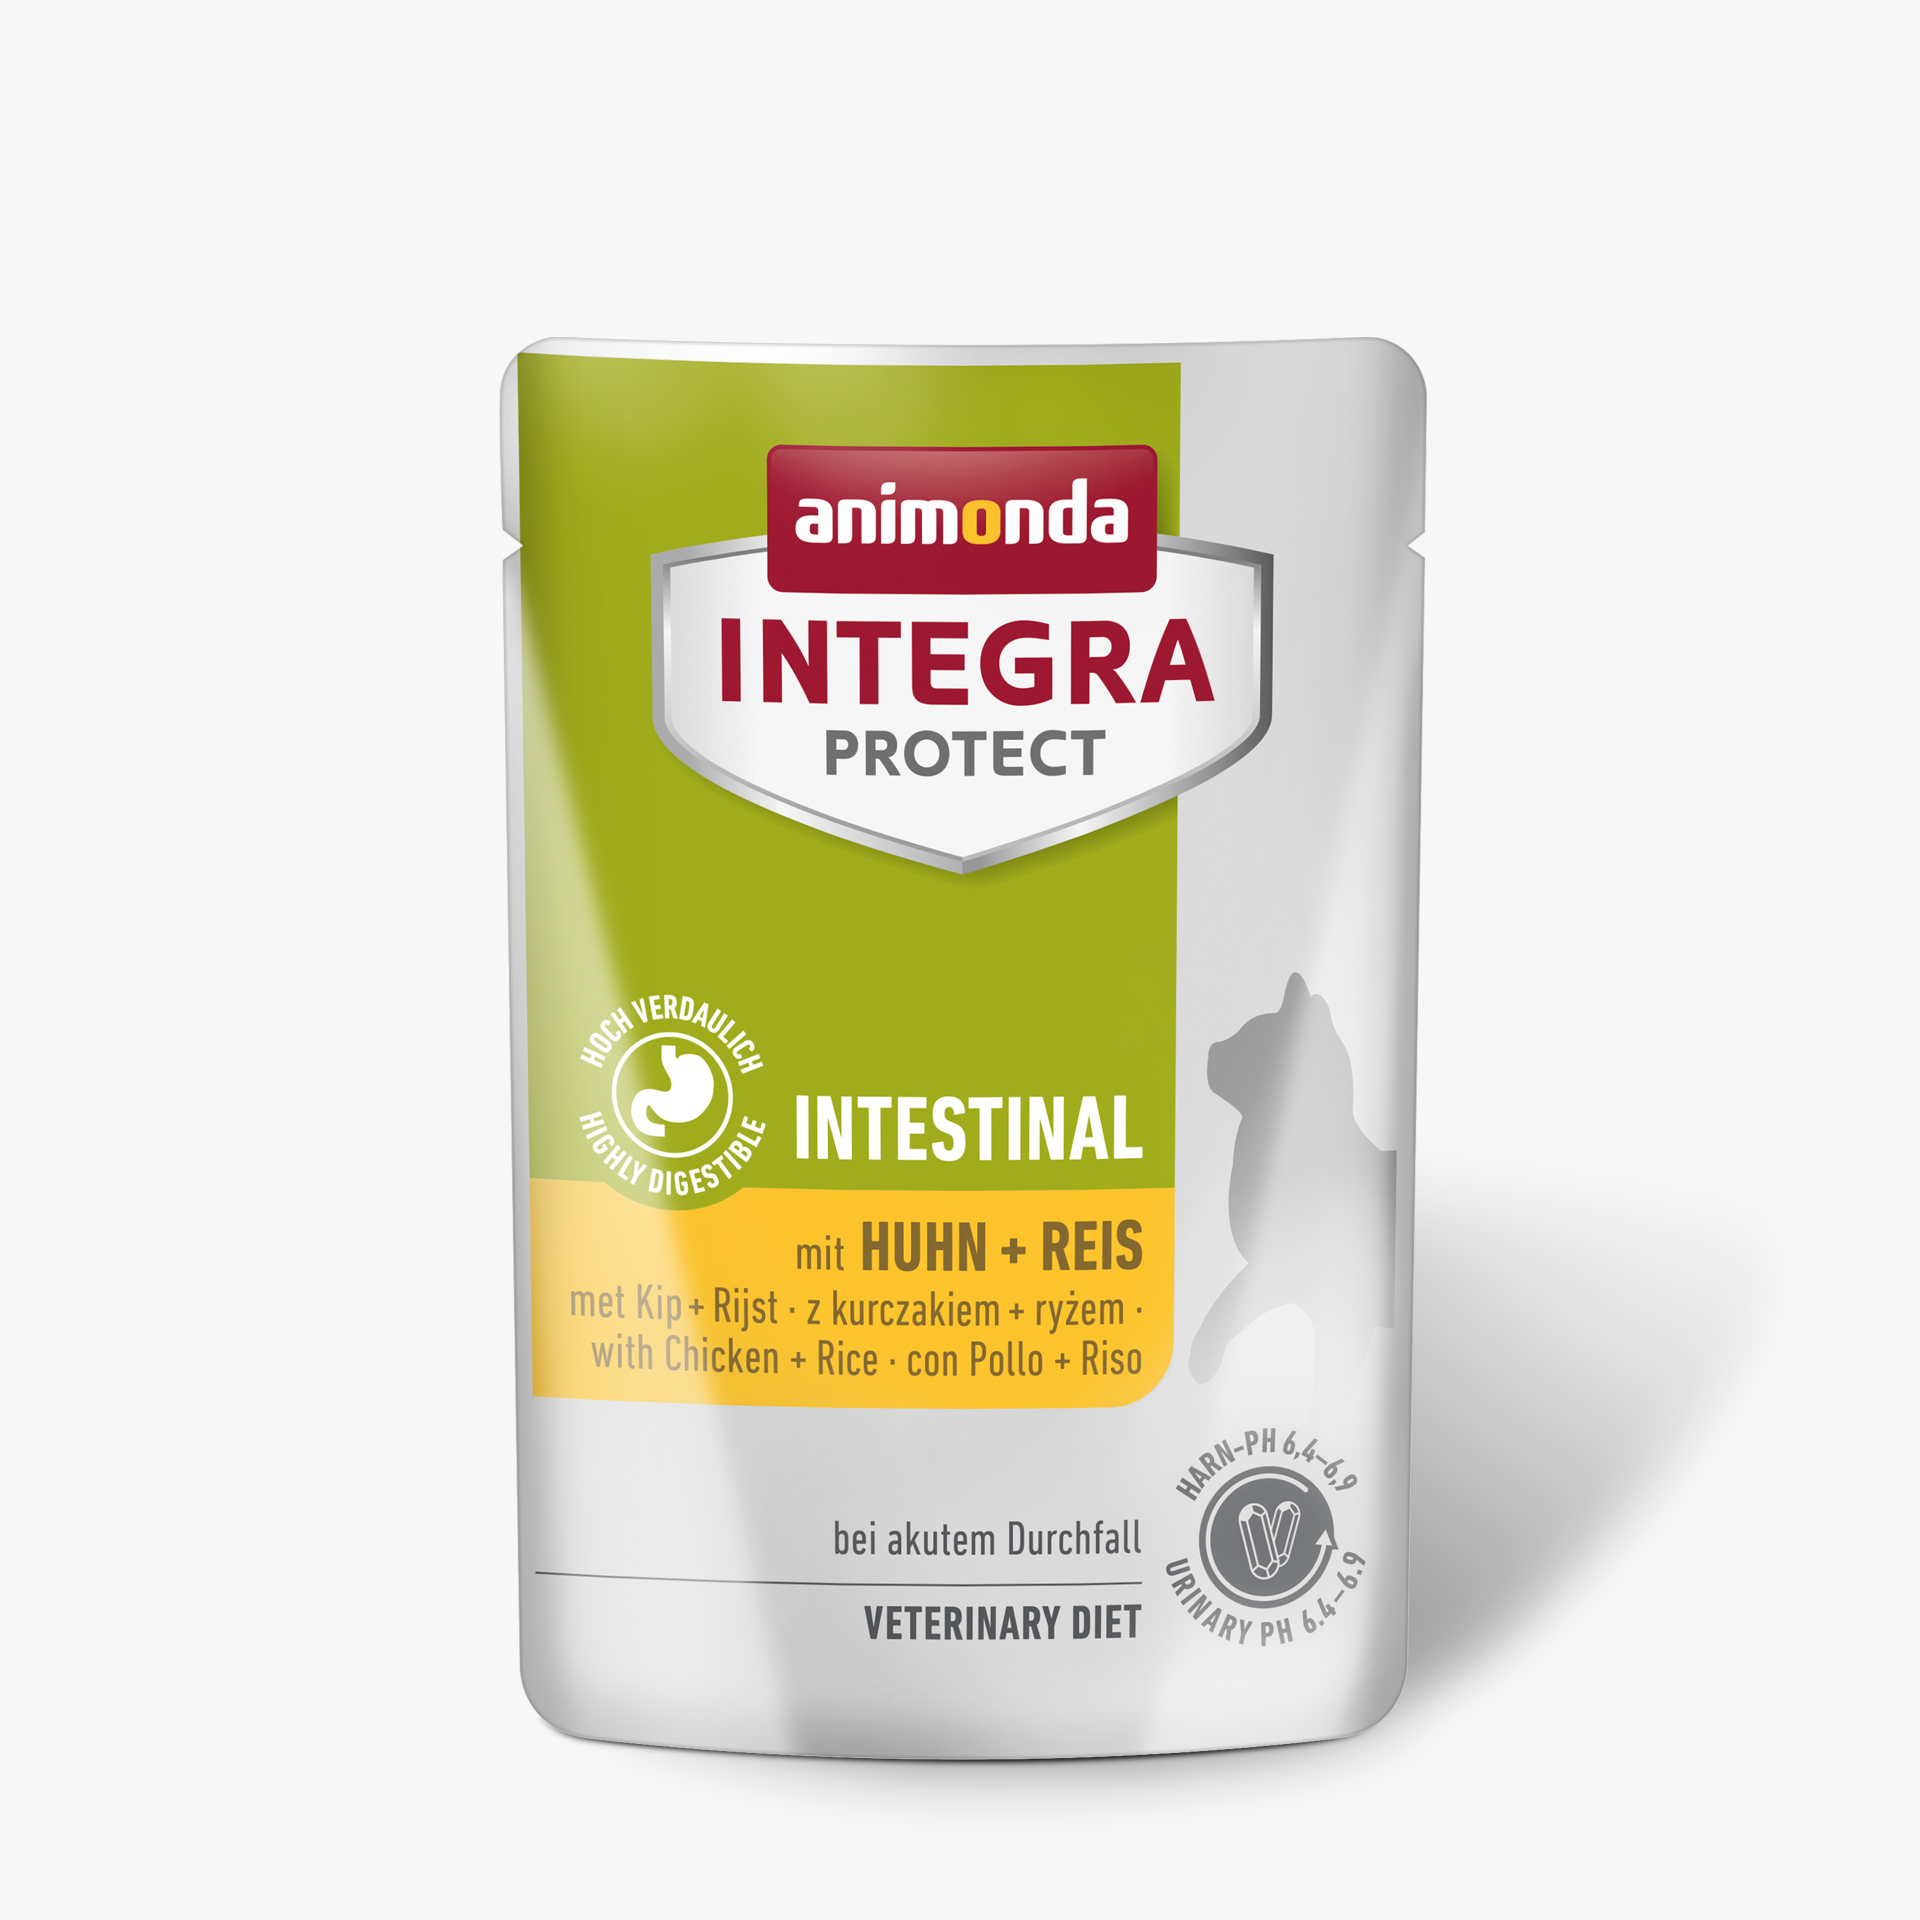 INTEGRA PROTECT with Chicken + Rice  Intestinal